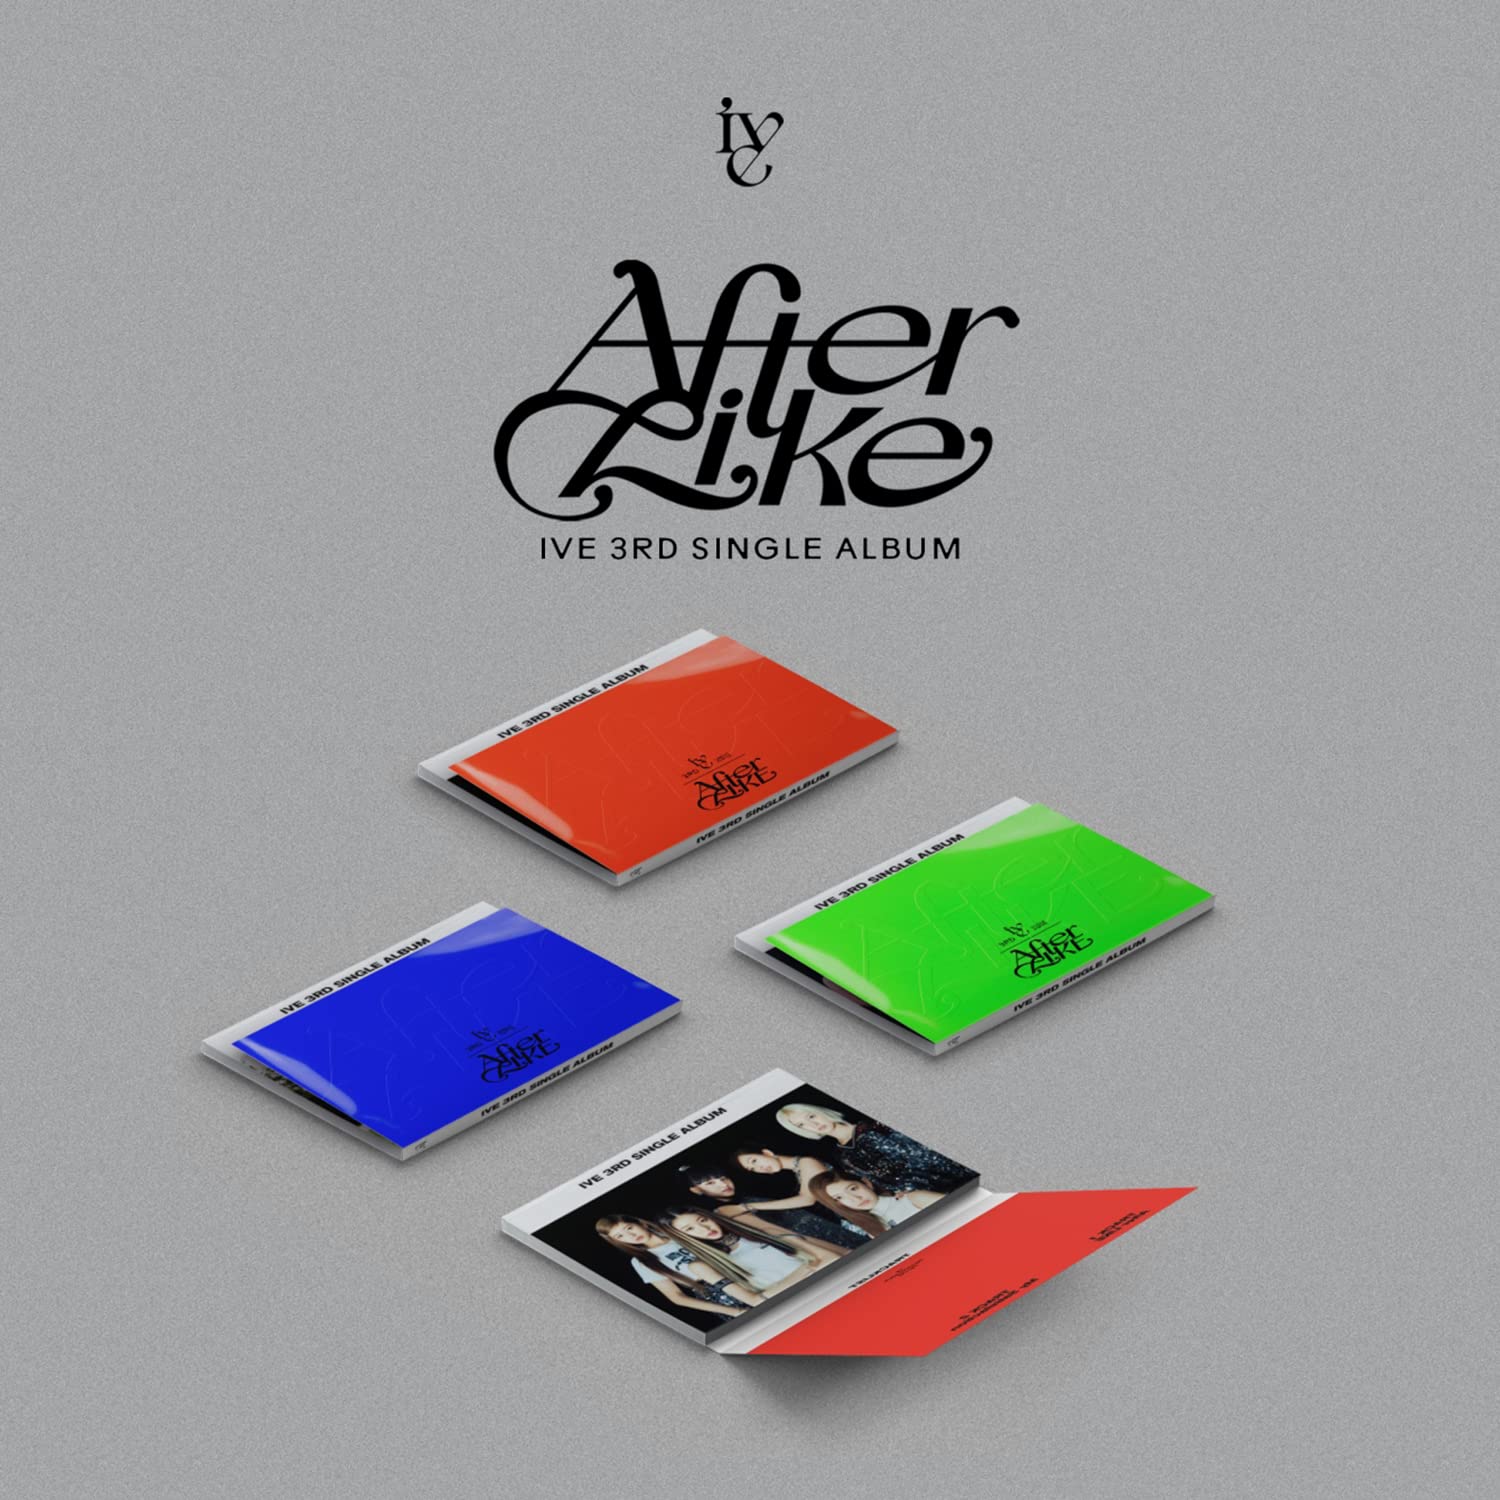 IVE 3RD SINGLE ALBUM [AFTER LIKE]